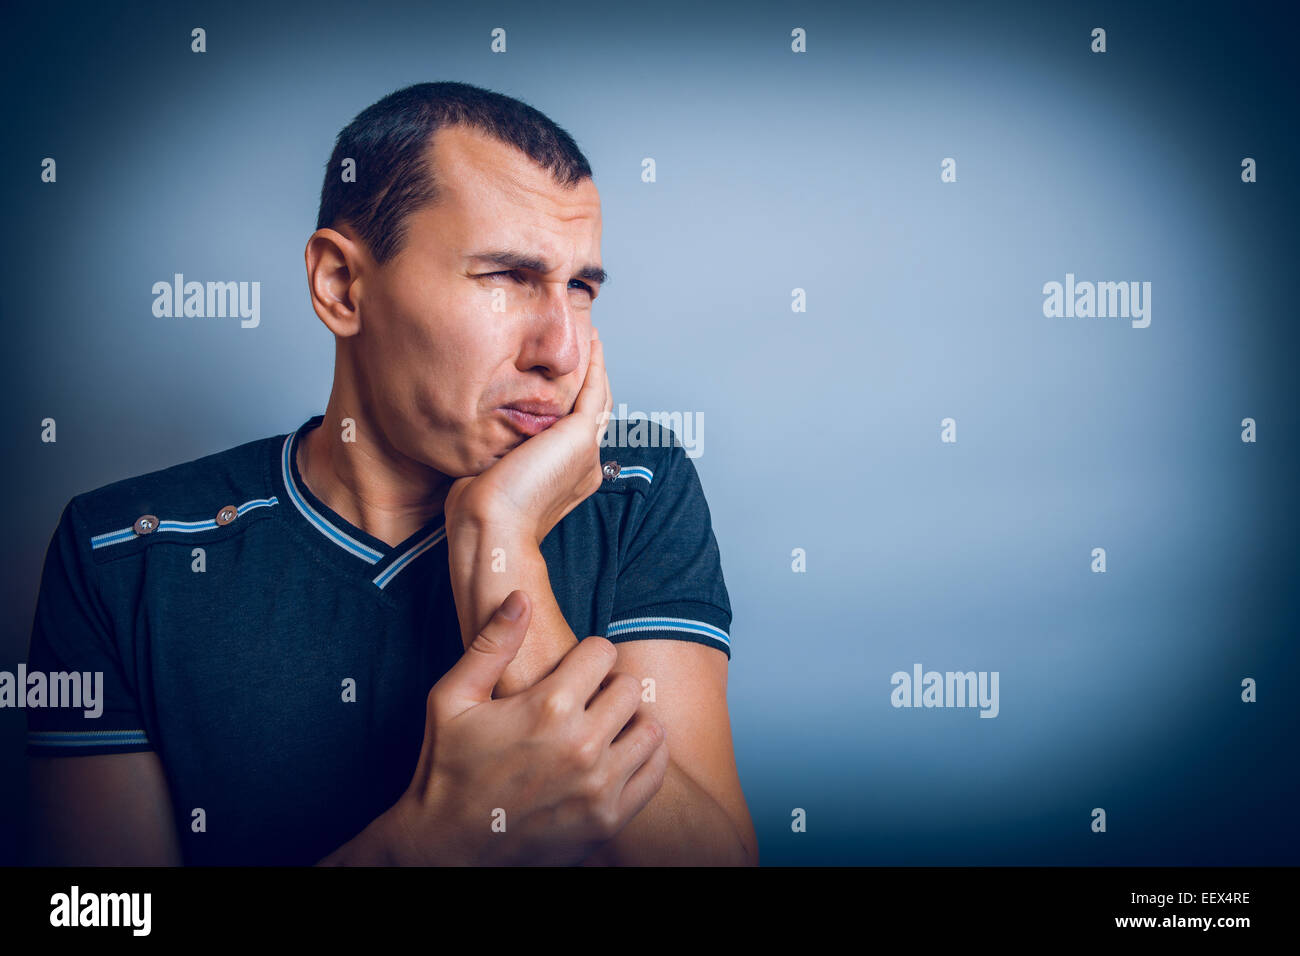 brunet the man of European appearance with his hand on  cheek Stock Photo